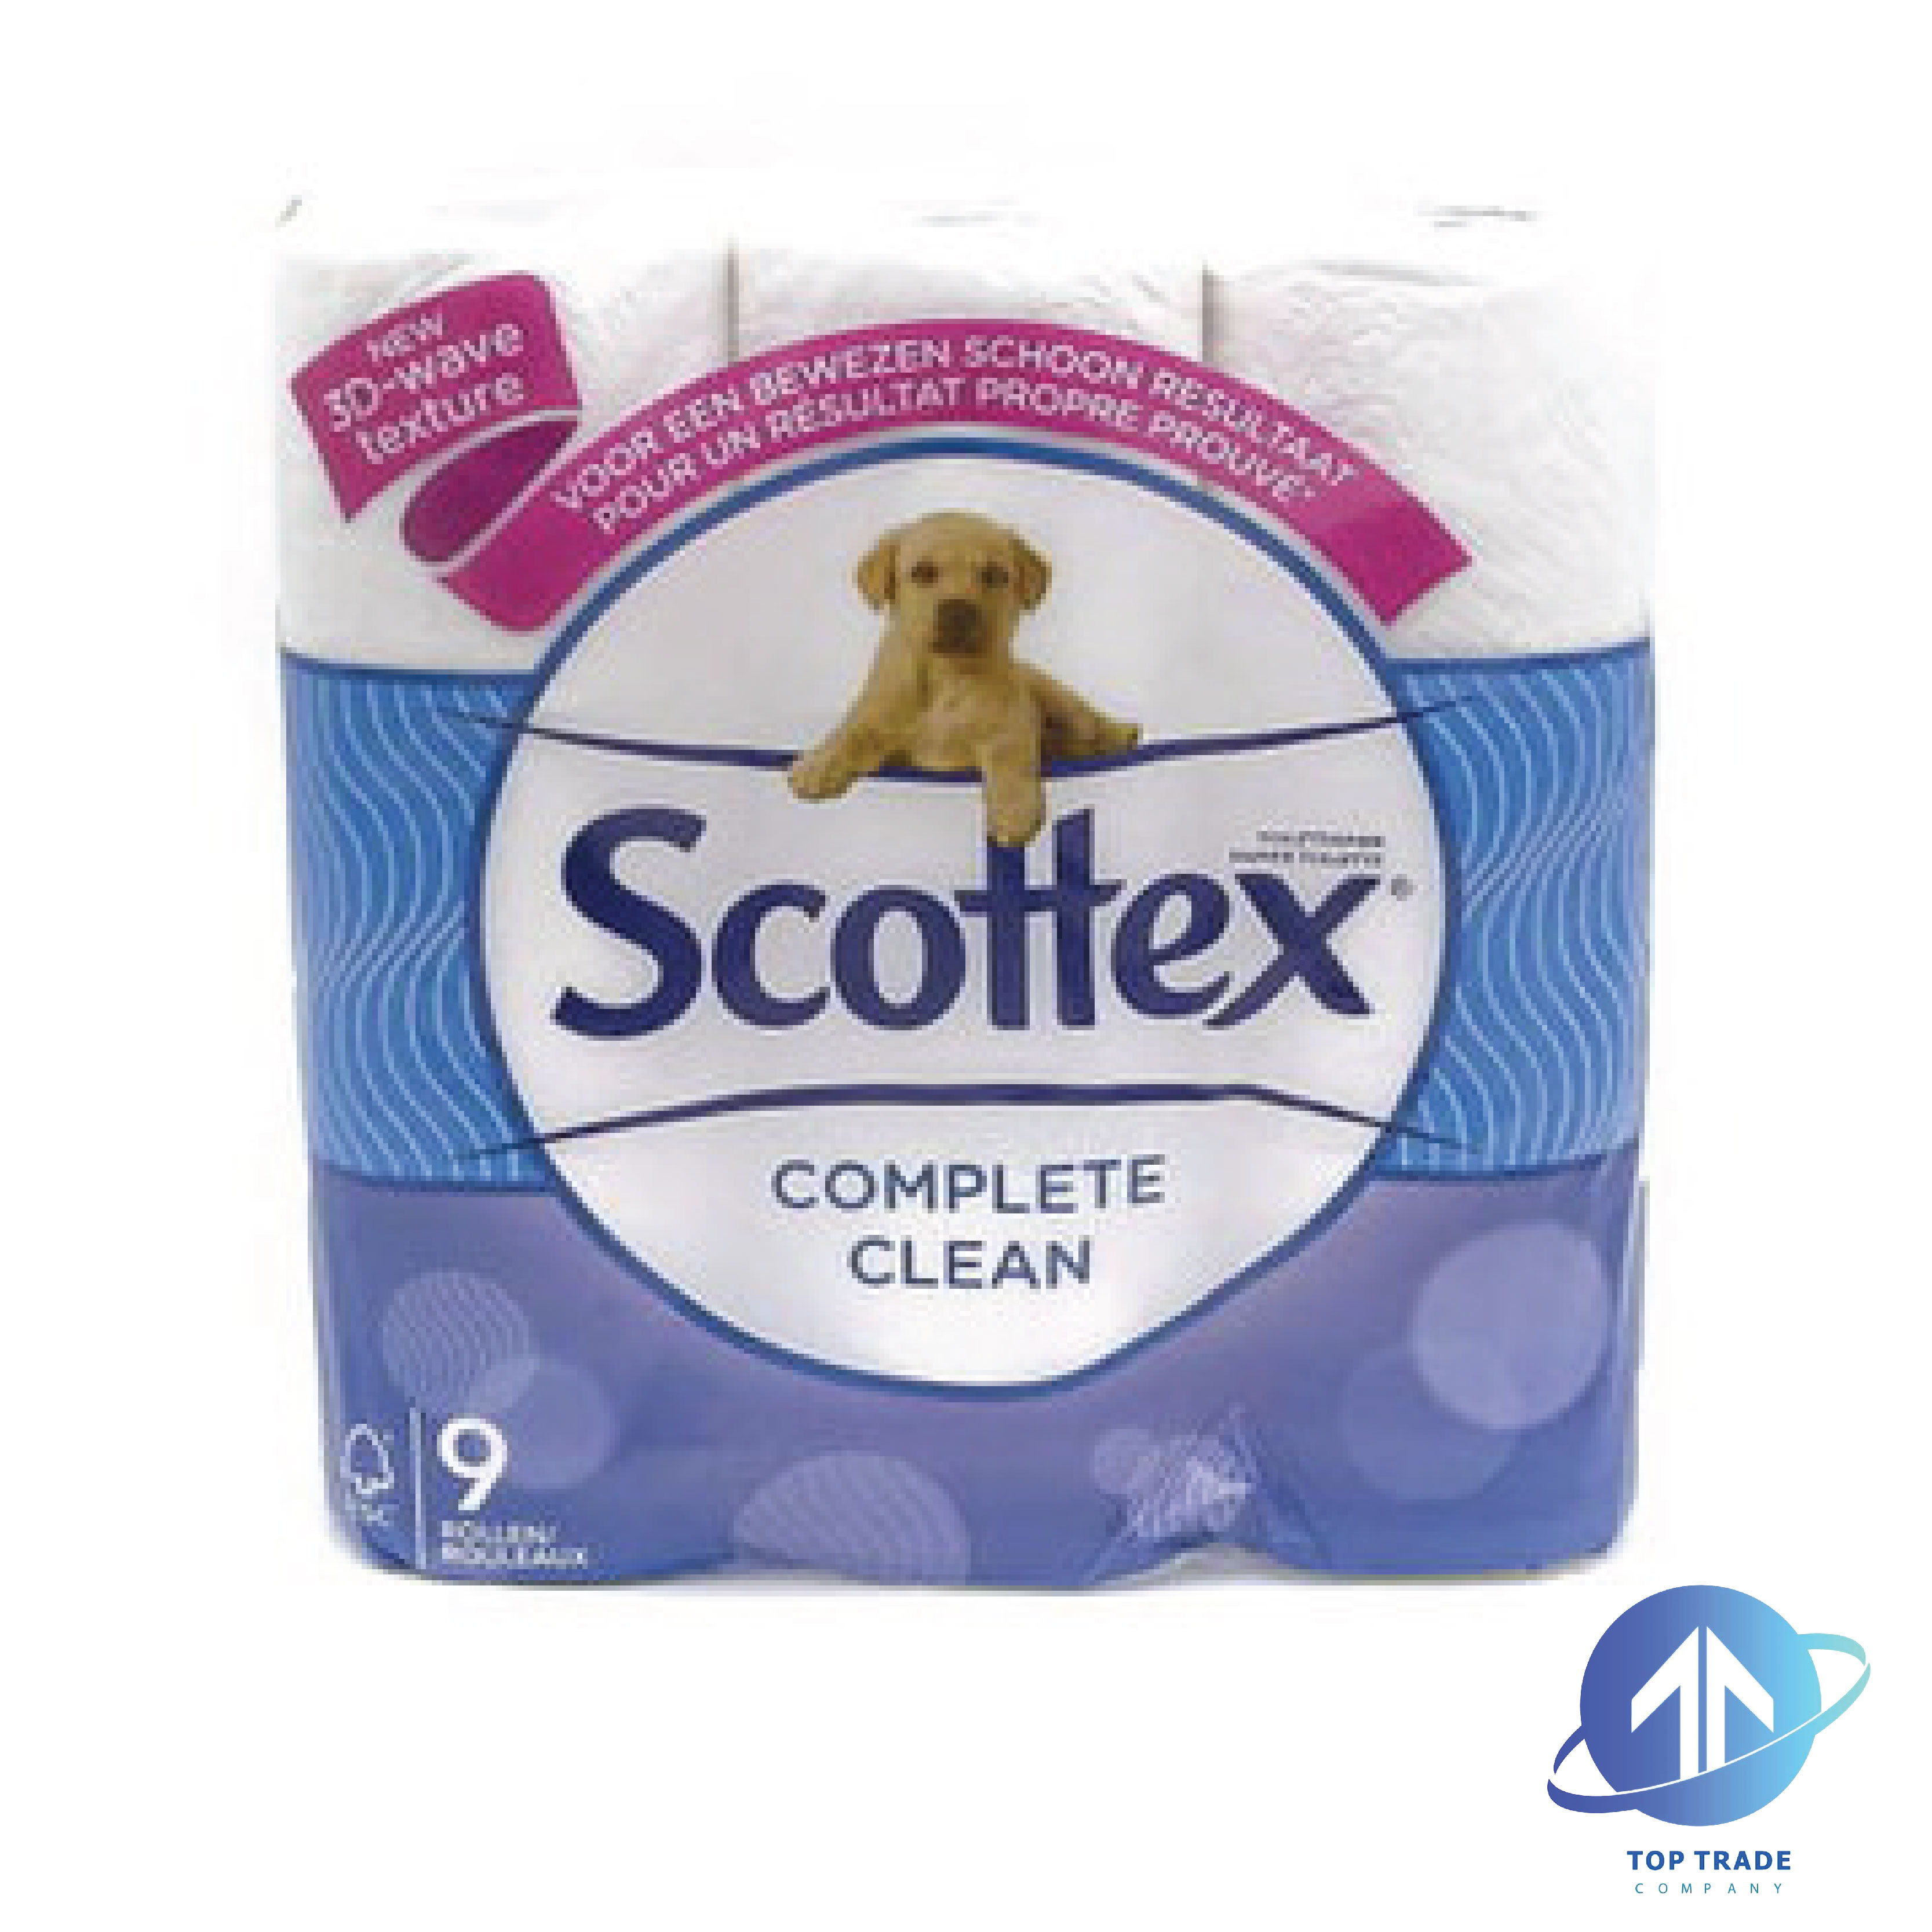 Scottex Complete Clean toilet paper 9 rolls 2 layers